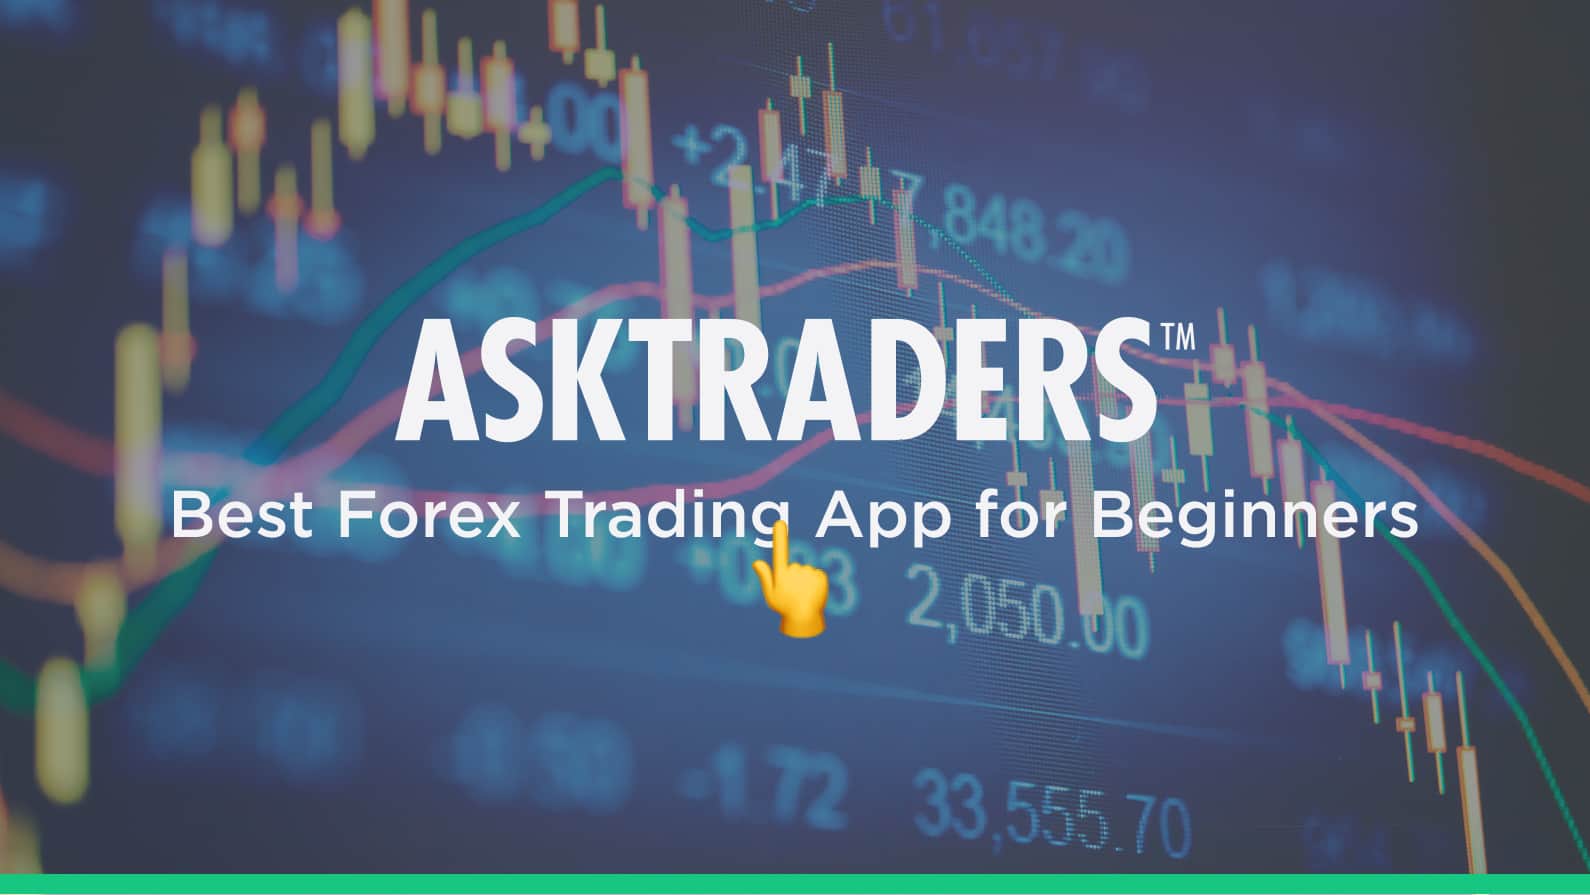 Best Forex Trading App For Beginners 2020 - AskTraders.com